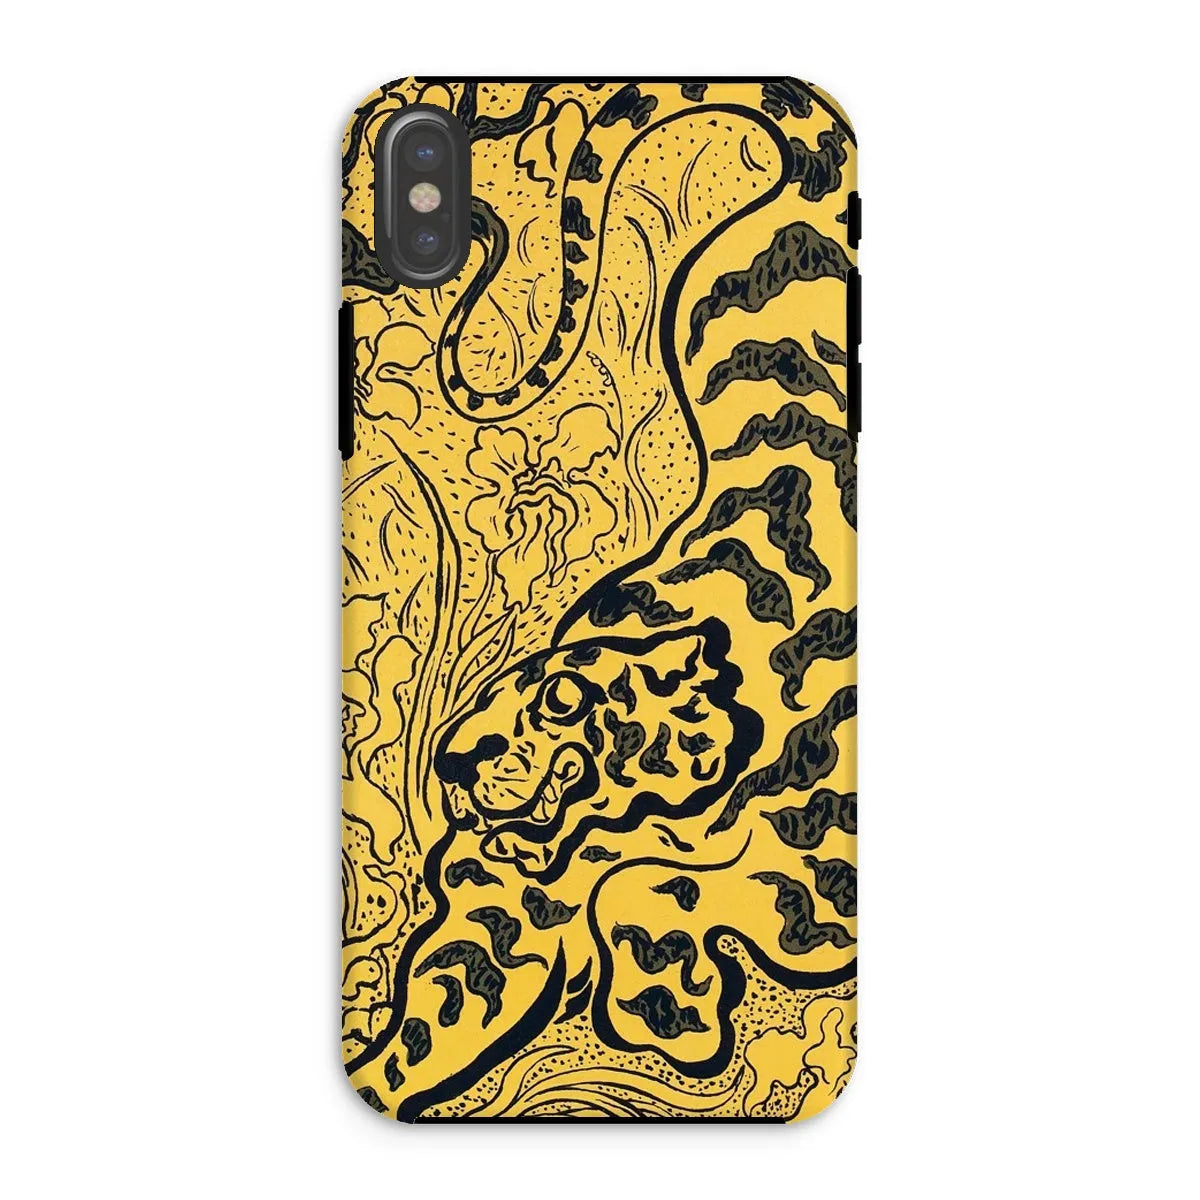 Tiger In The Jungle - Graphic Art Phone Case - Paul Ranson - Iphone Xs / Matte - Mobile Phone Cases - Aesthetic Art